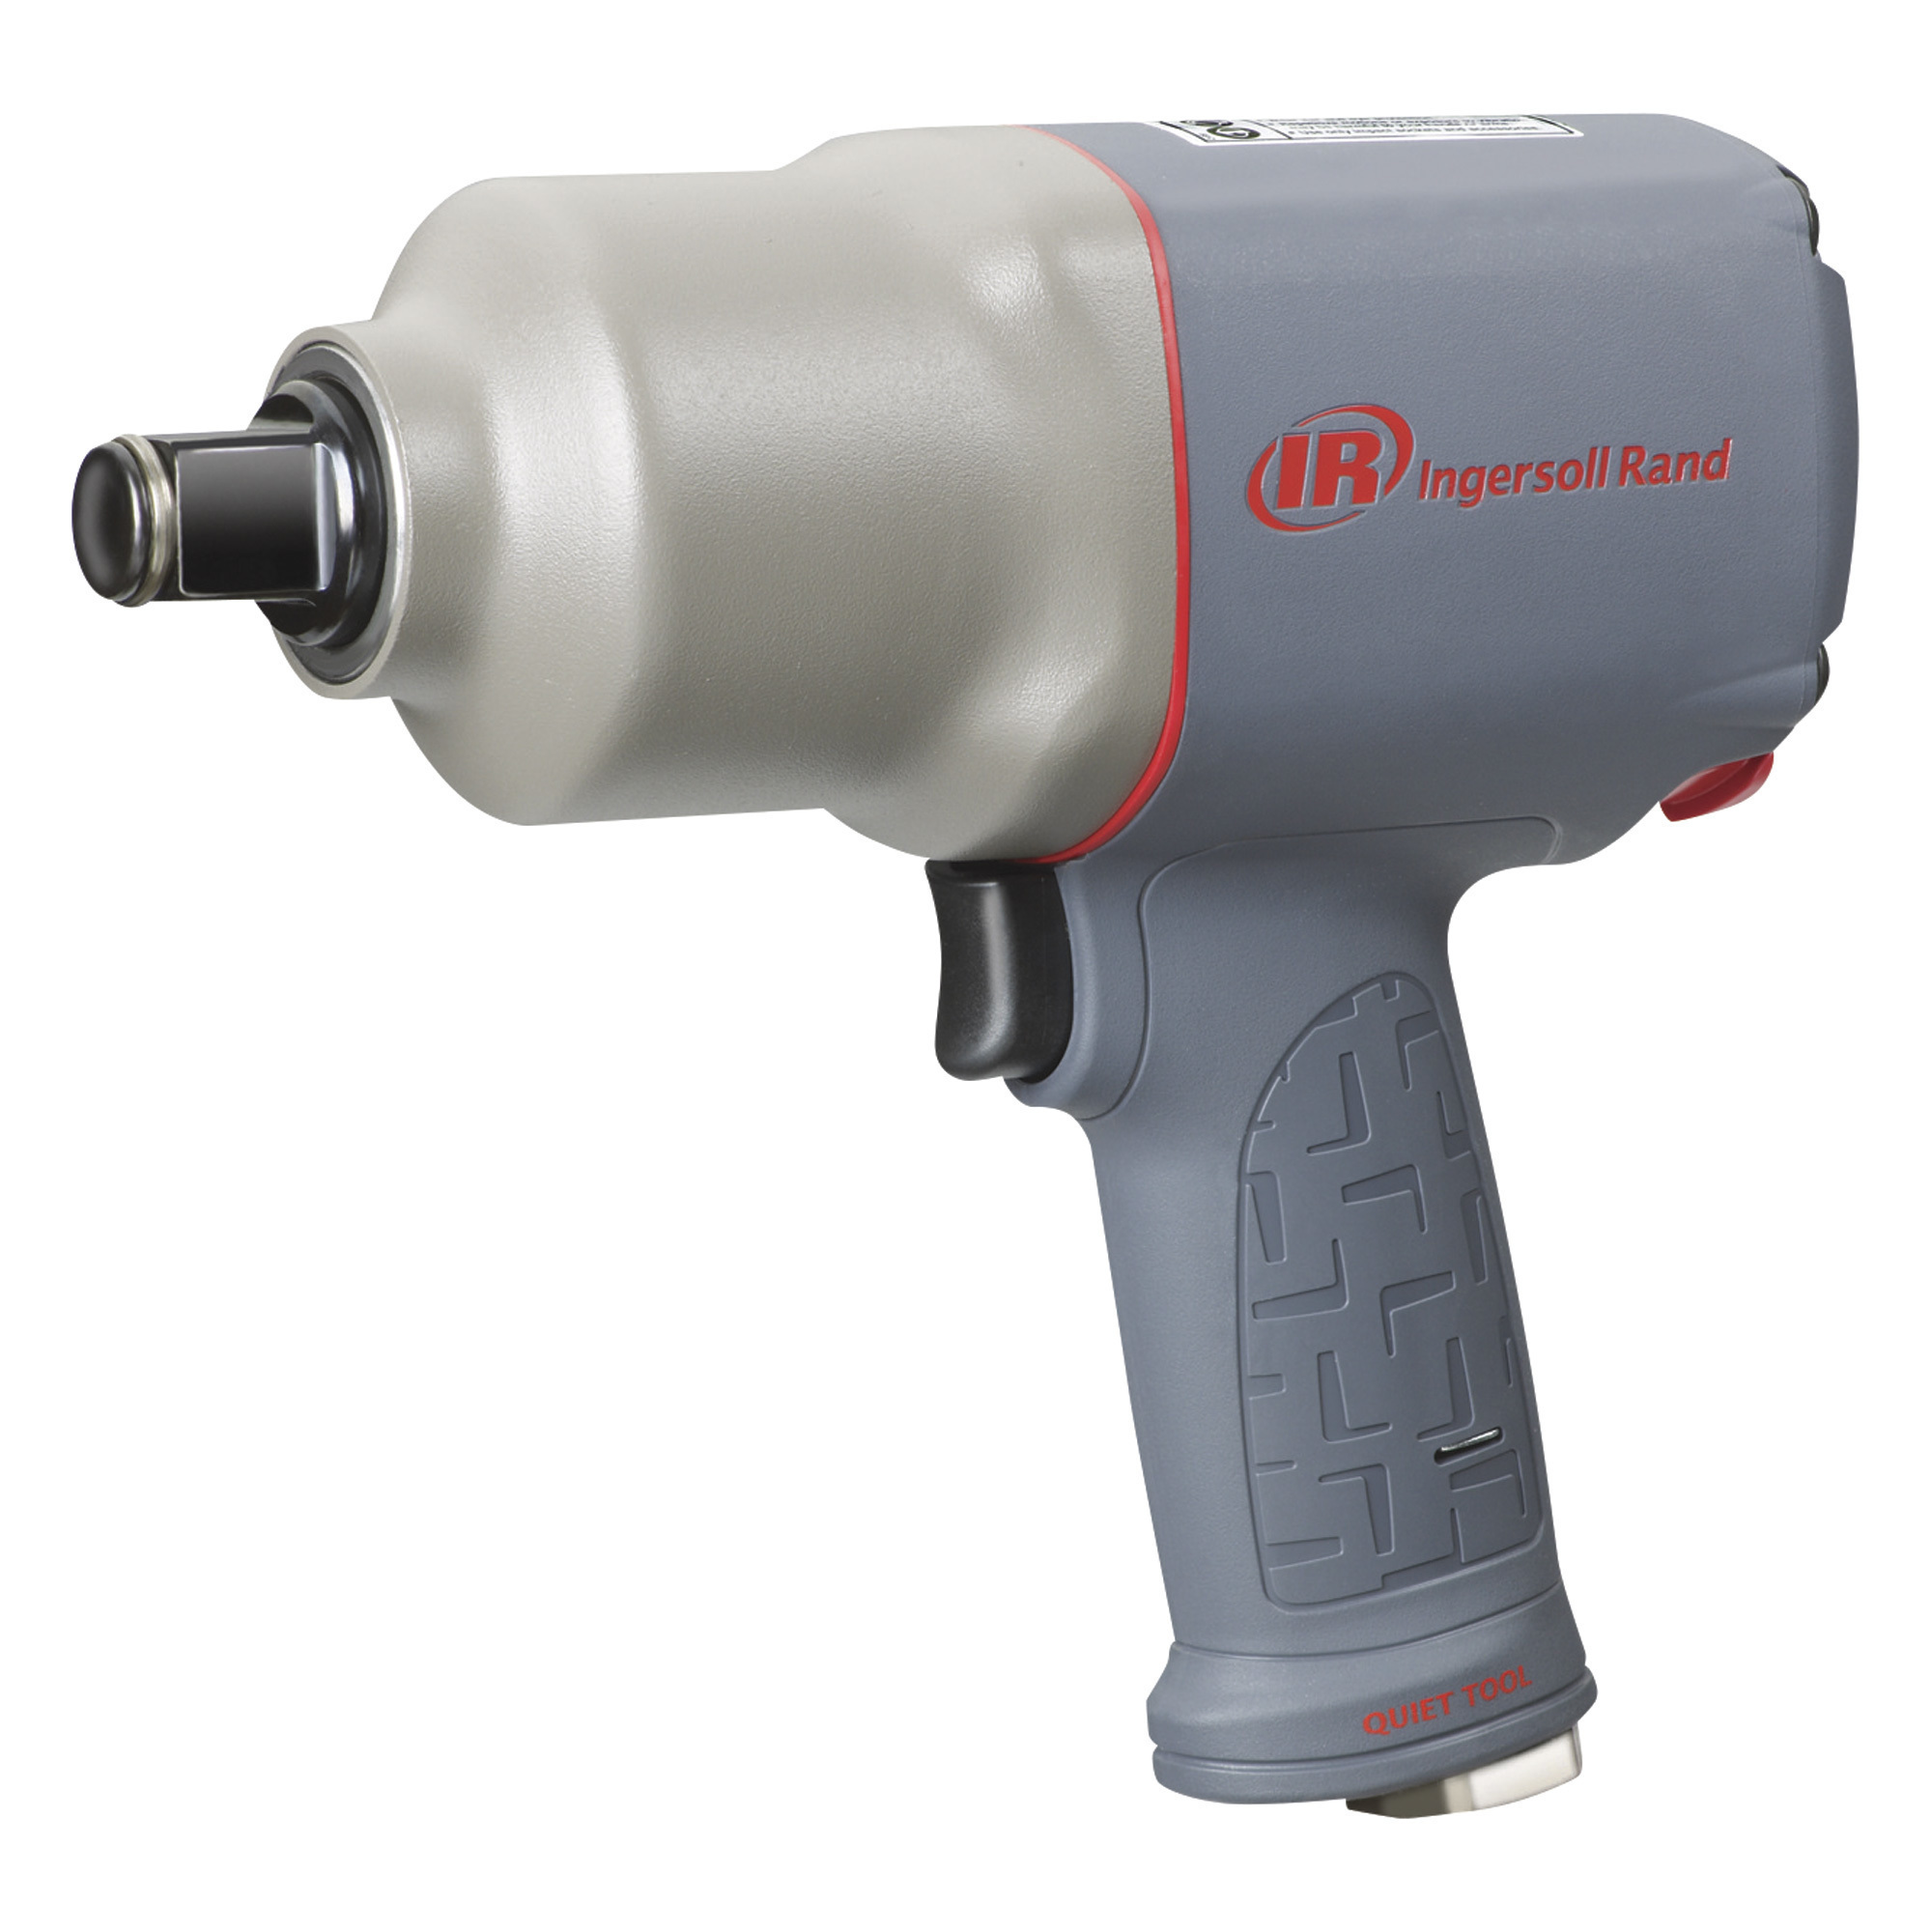 Ingersoll Rand Composite Air Impact Wrench, 3/4Inch Drive, 8.5 CFM, 1350 Ft./Lbs. Torque, Model 2145QiMAX